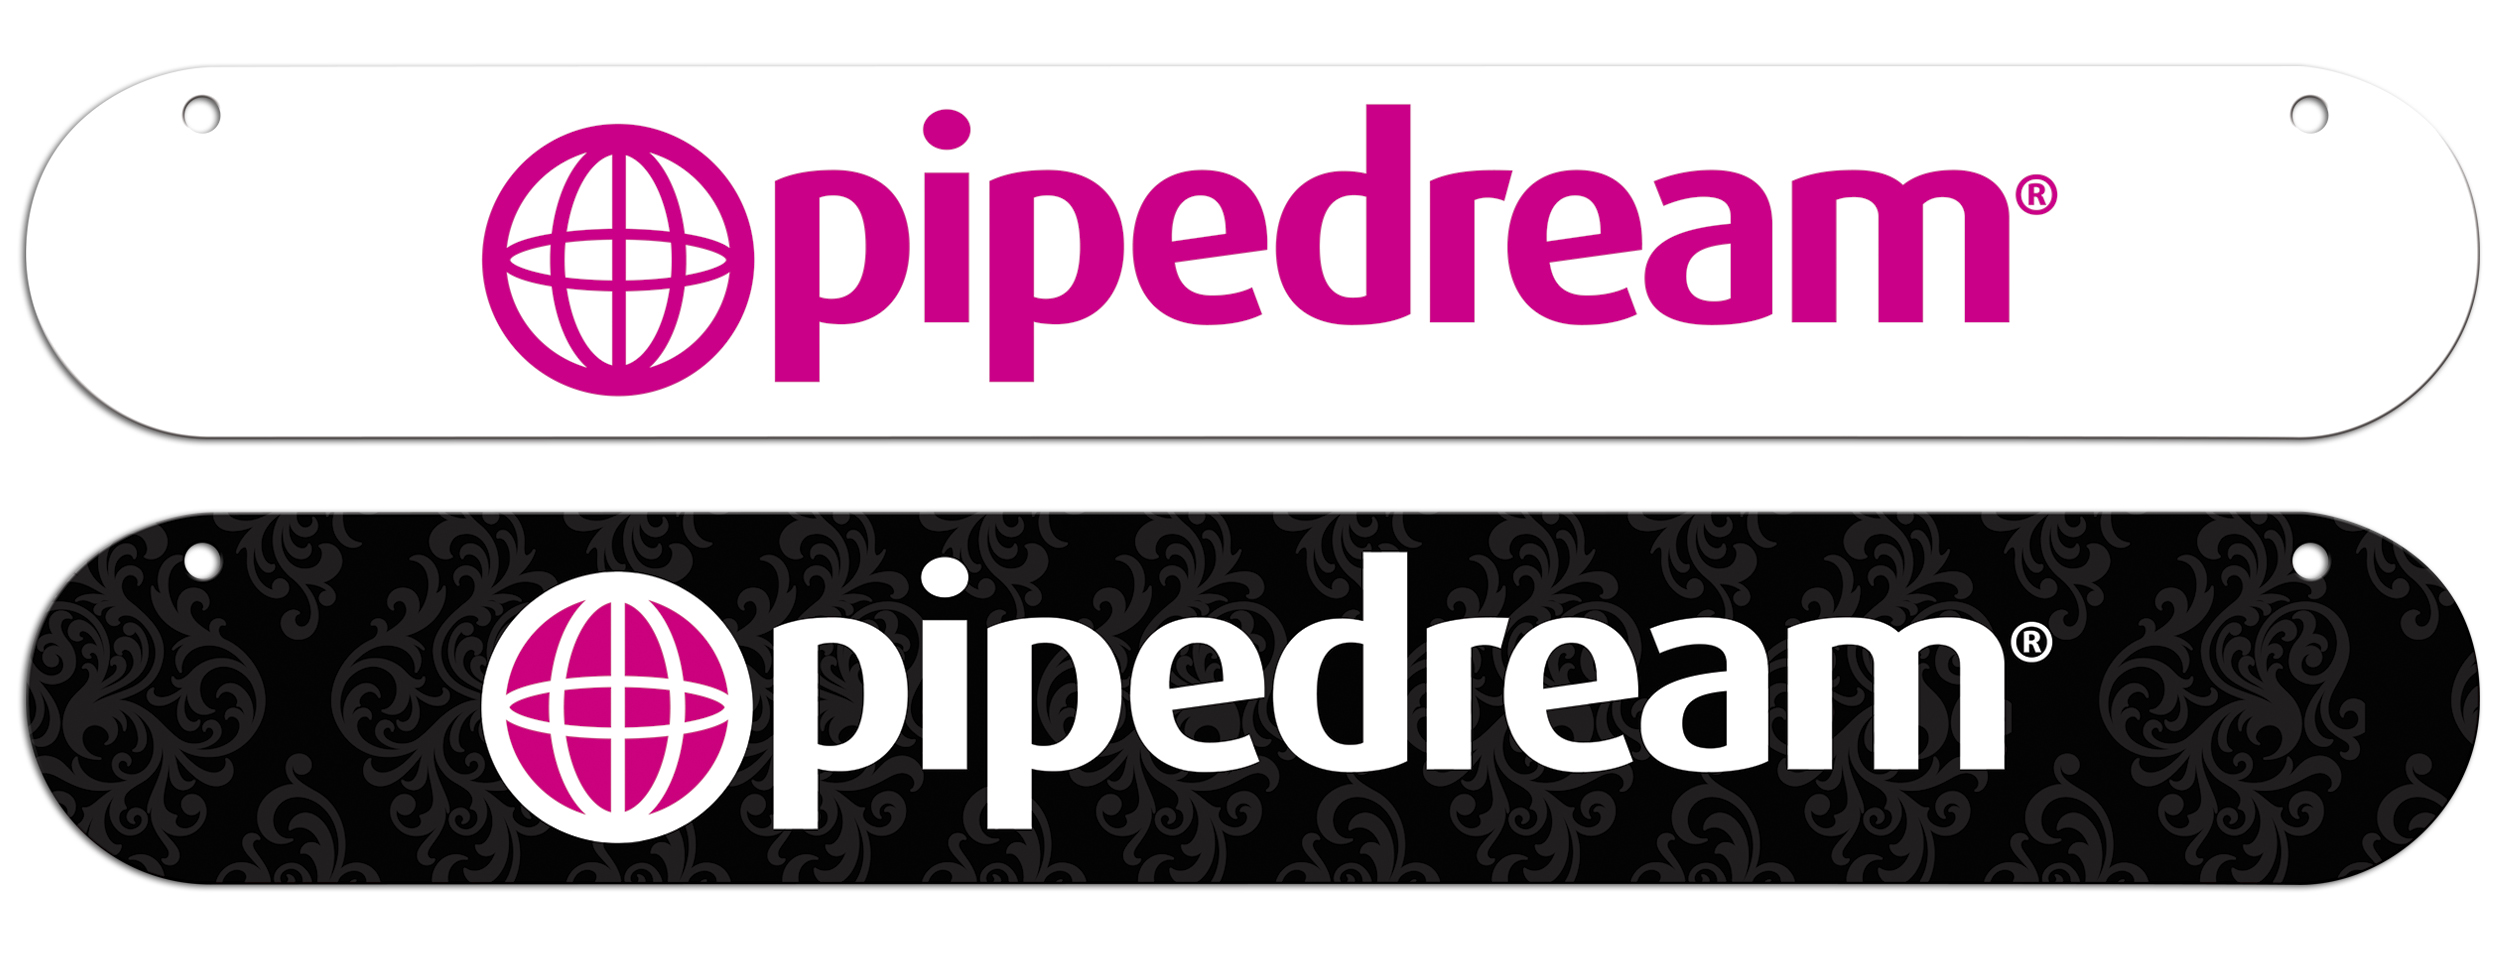 PIPEDREAM PROMOTIONAL SIGN 6X36